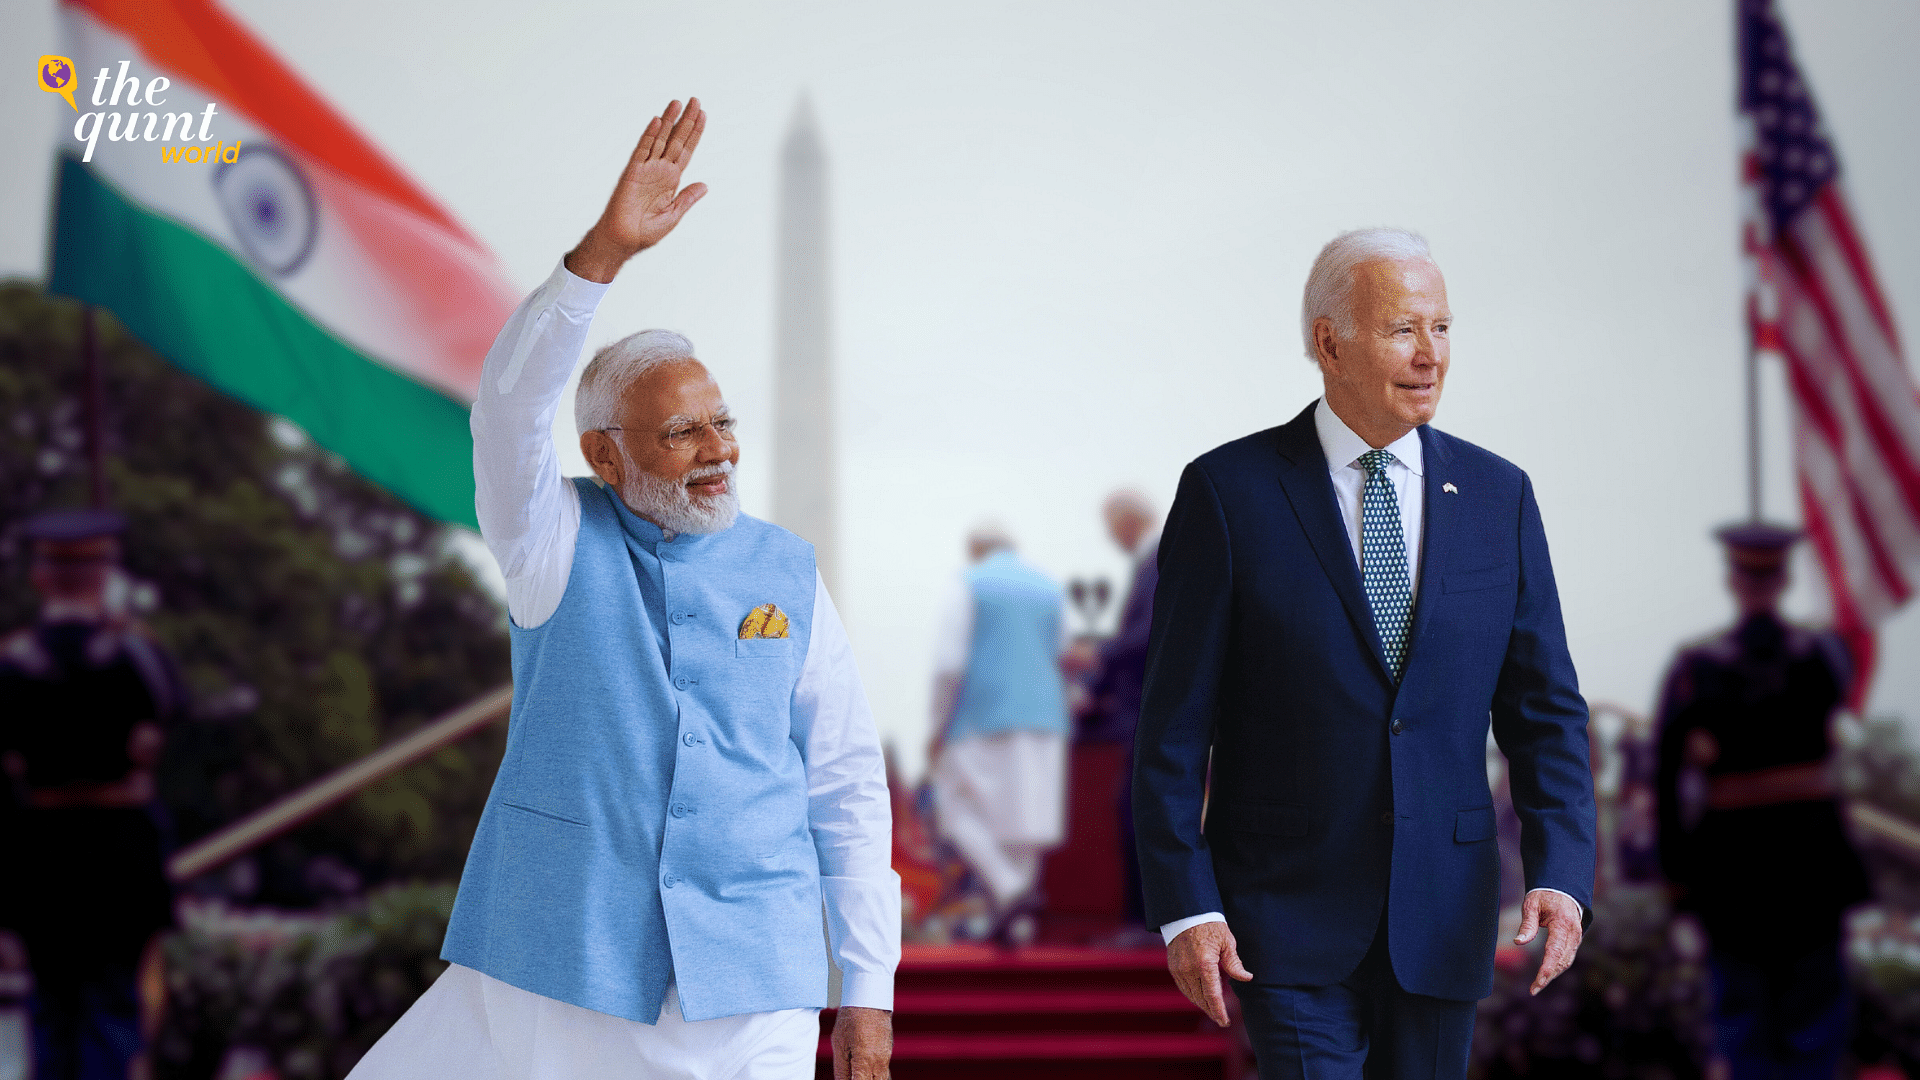 <div class="paragraphs"><p>Prime Minster Narendra Modi and United States President Joe Biden addressed a press conference following bilateral talks and addressed issues of human rights, press freedom, discrimination and democracy.</p></div>